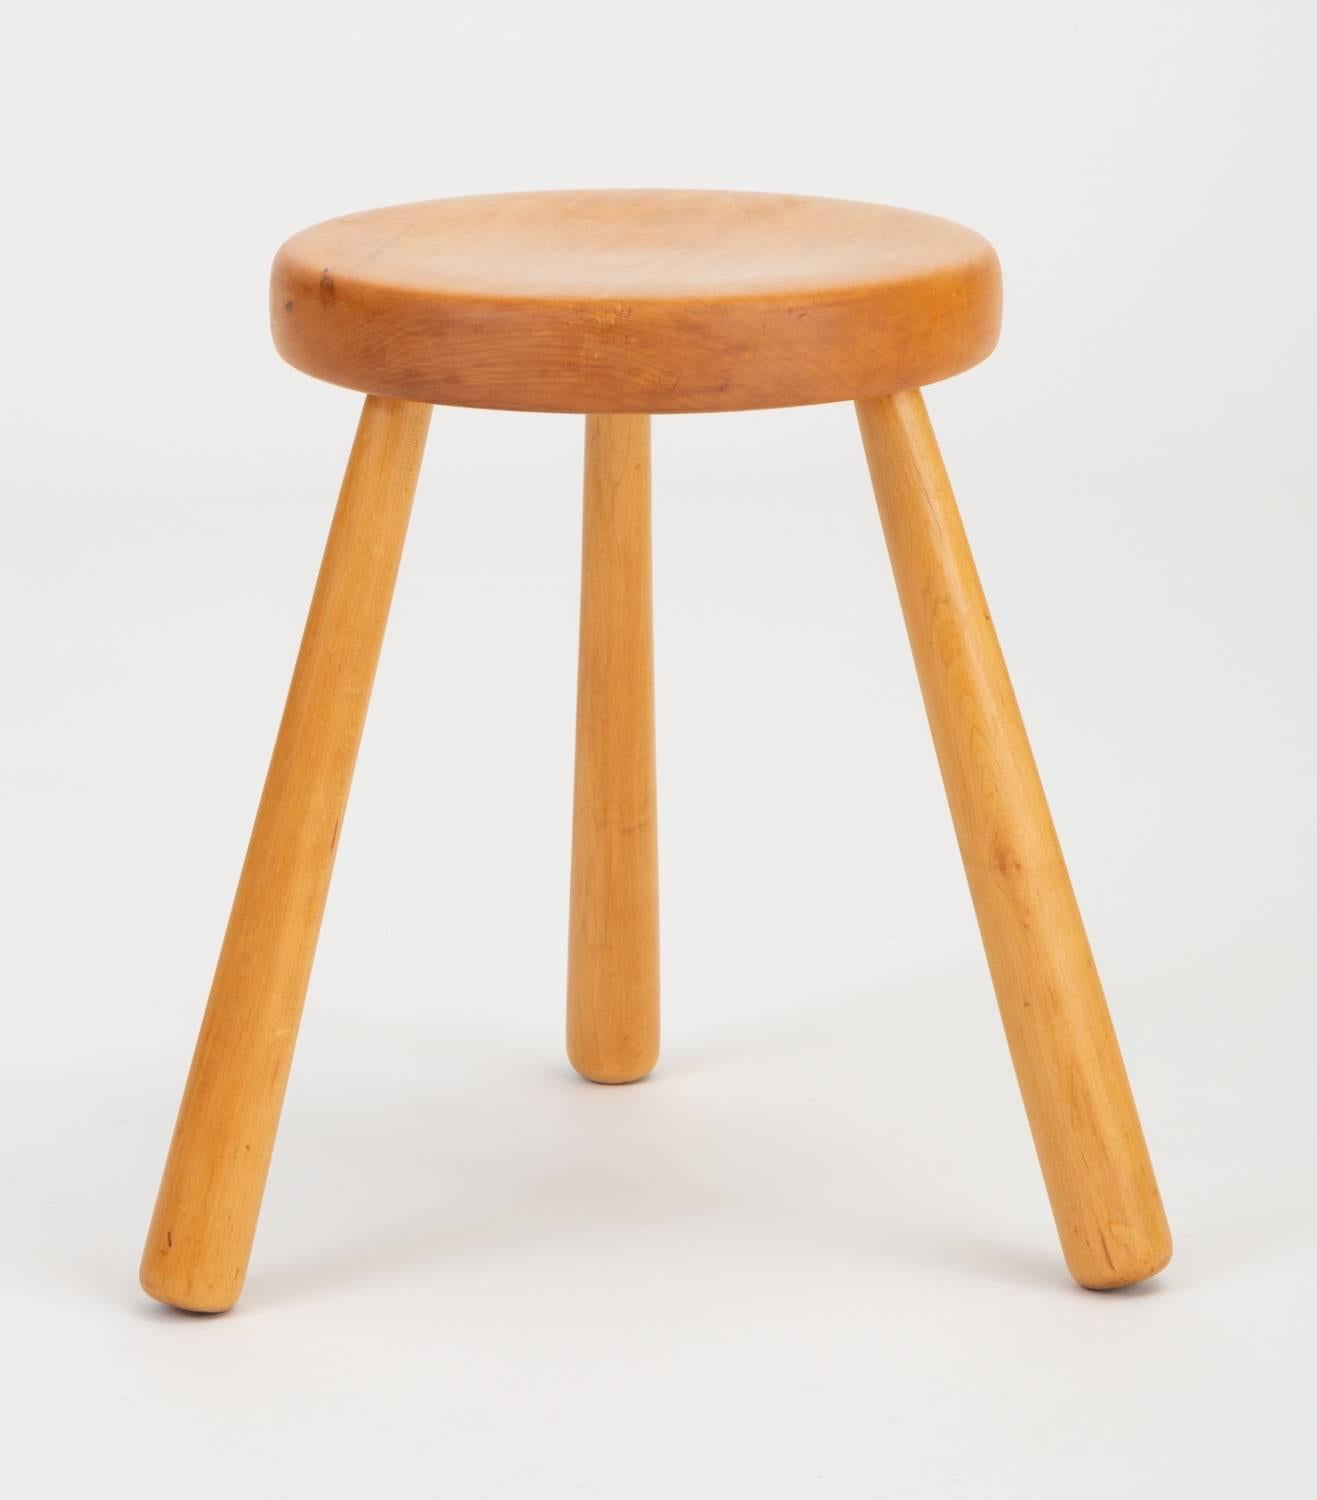 A small, three-legged stool in turned pinewood similar to the rustic modern designs by Charlotte Perriand for the Les Arcs ski chalet in 1968. This example has a tripod base for optimal stability, and a slightly bowed seat for comfort. The turned